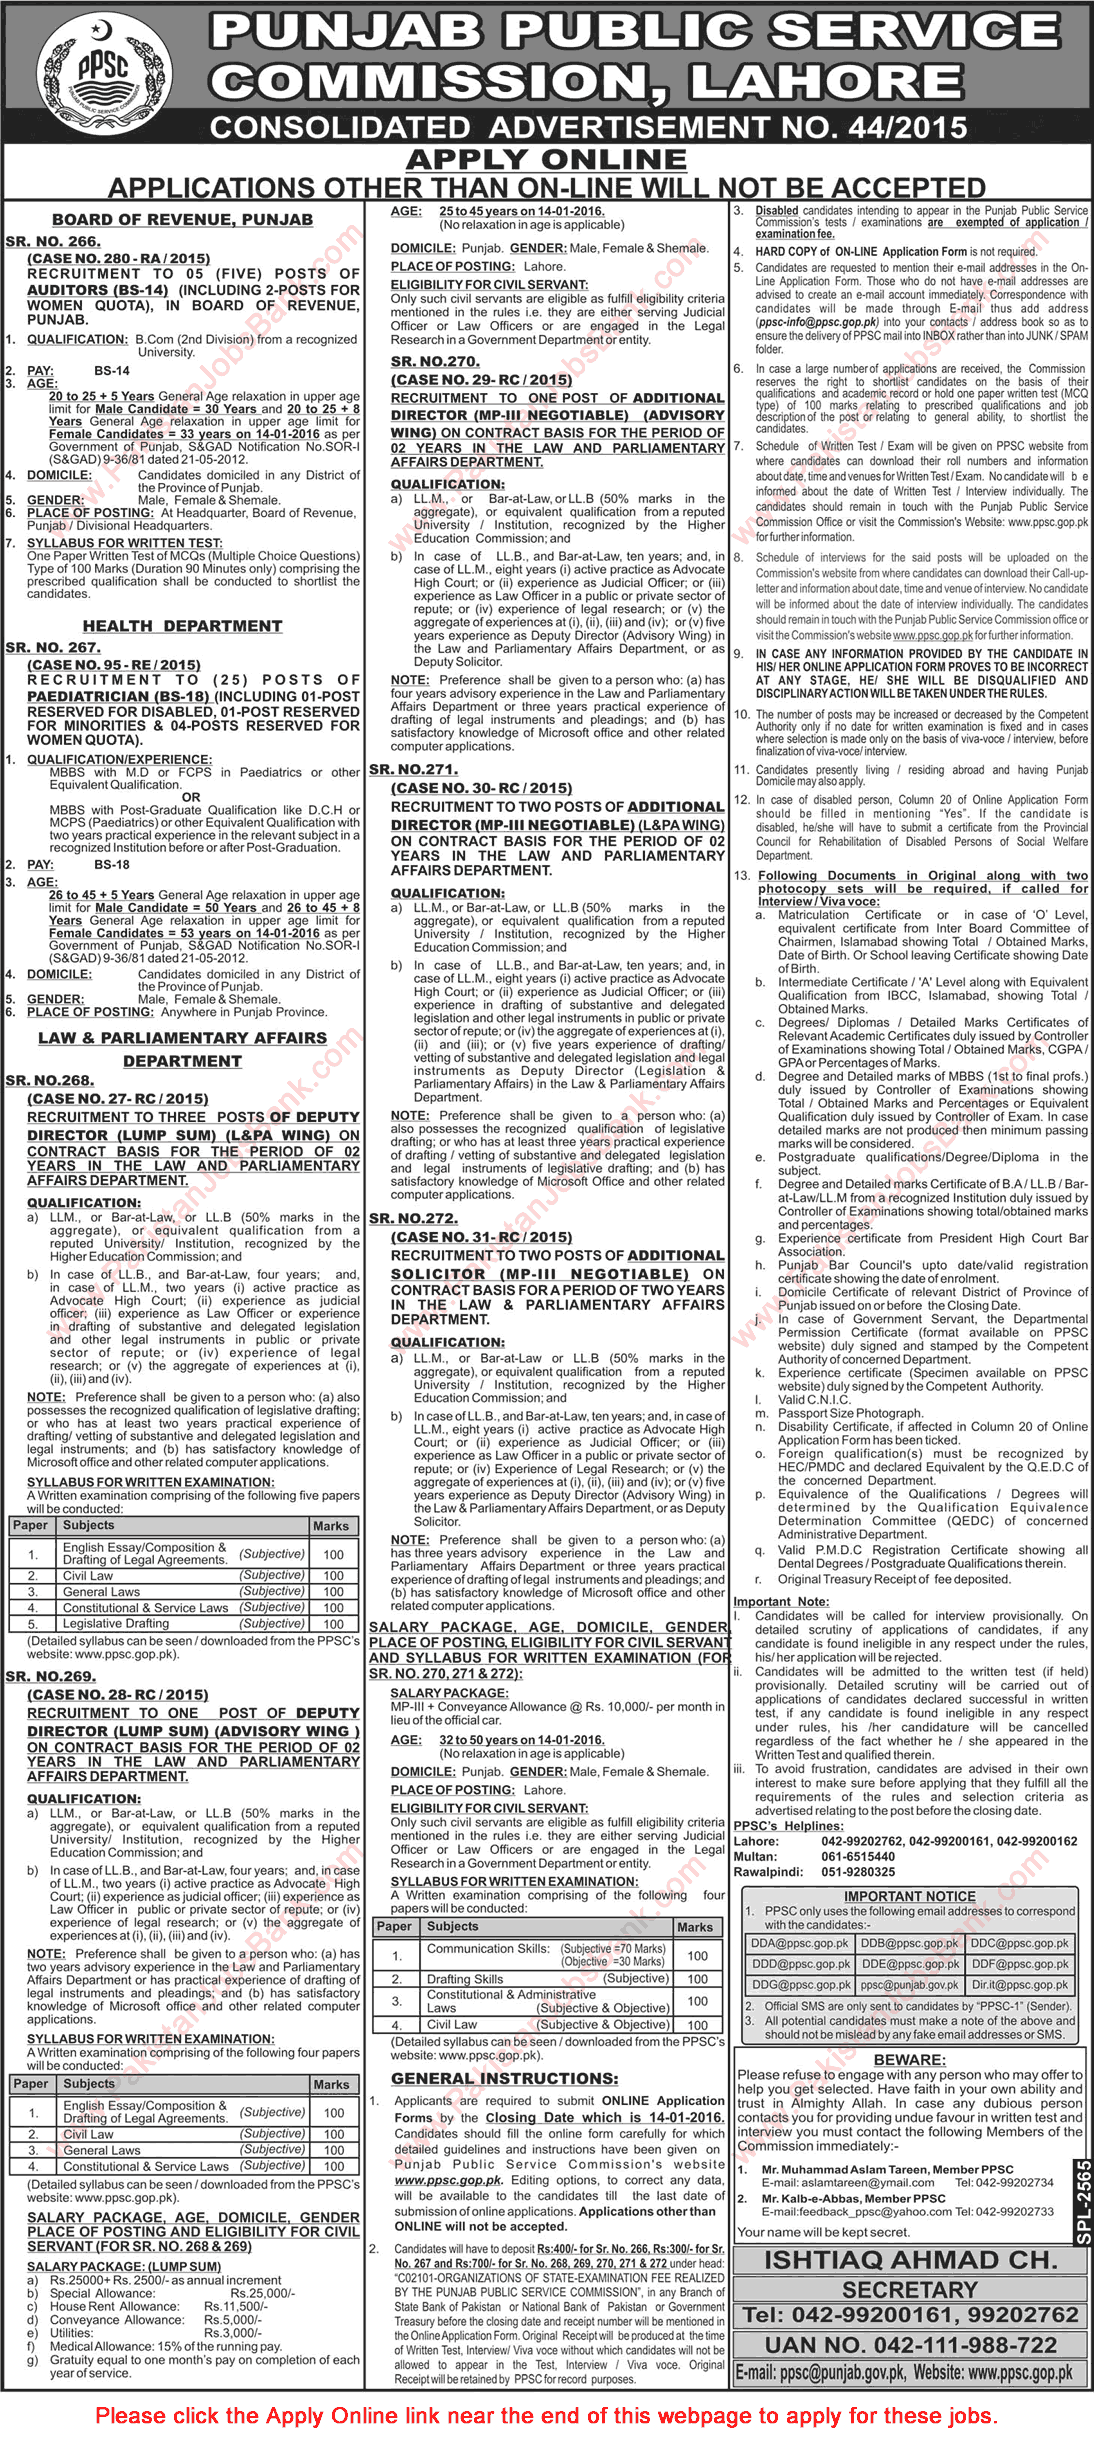 PPSC Jobs December 2015 / 2016 Consolidated Advertisement No 44/2015 Apply Online Latest